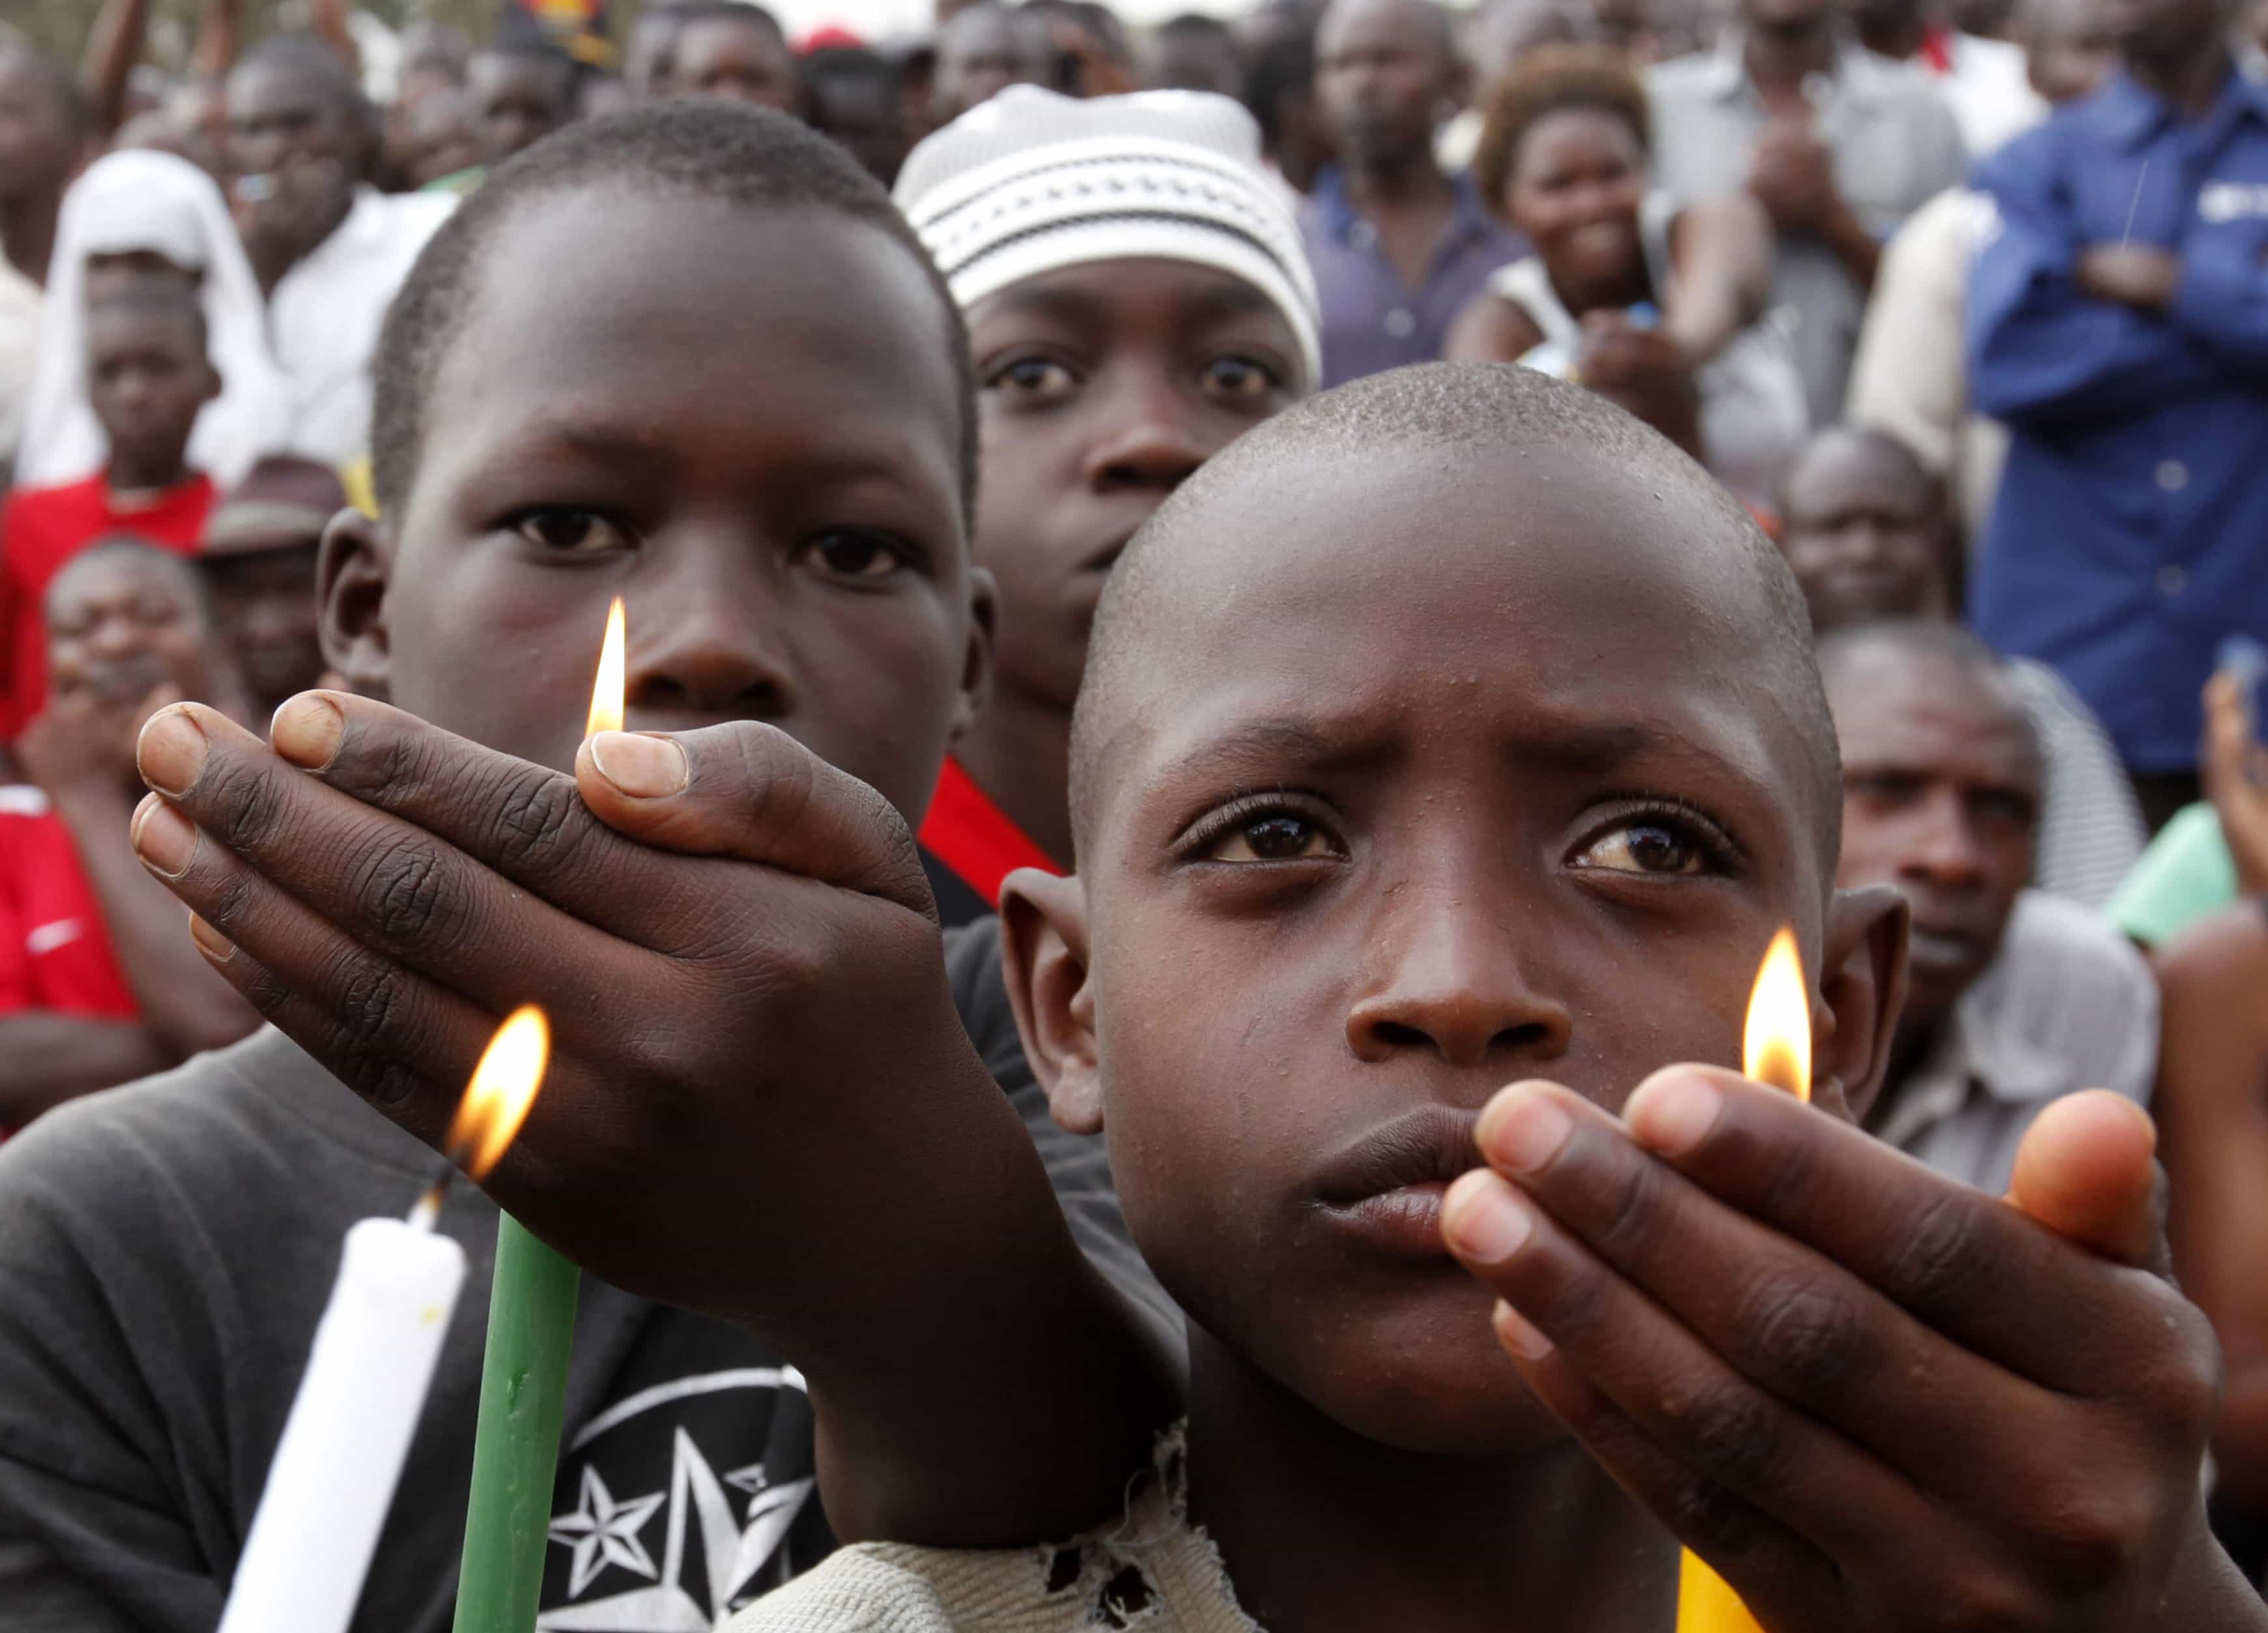 Children hold candles during a rally by Uganda's opposition parties in memory of the nine people who died during a government crackdown on protesters taking part in the "walk to work" campaign in Masaka town, Uganda, 10 August 2011, REUTERS/James Akena